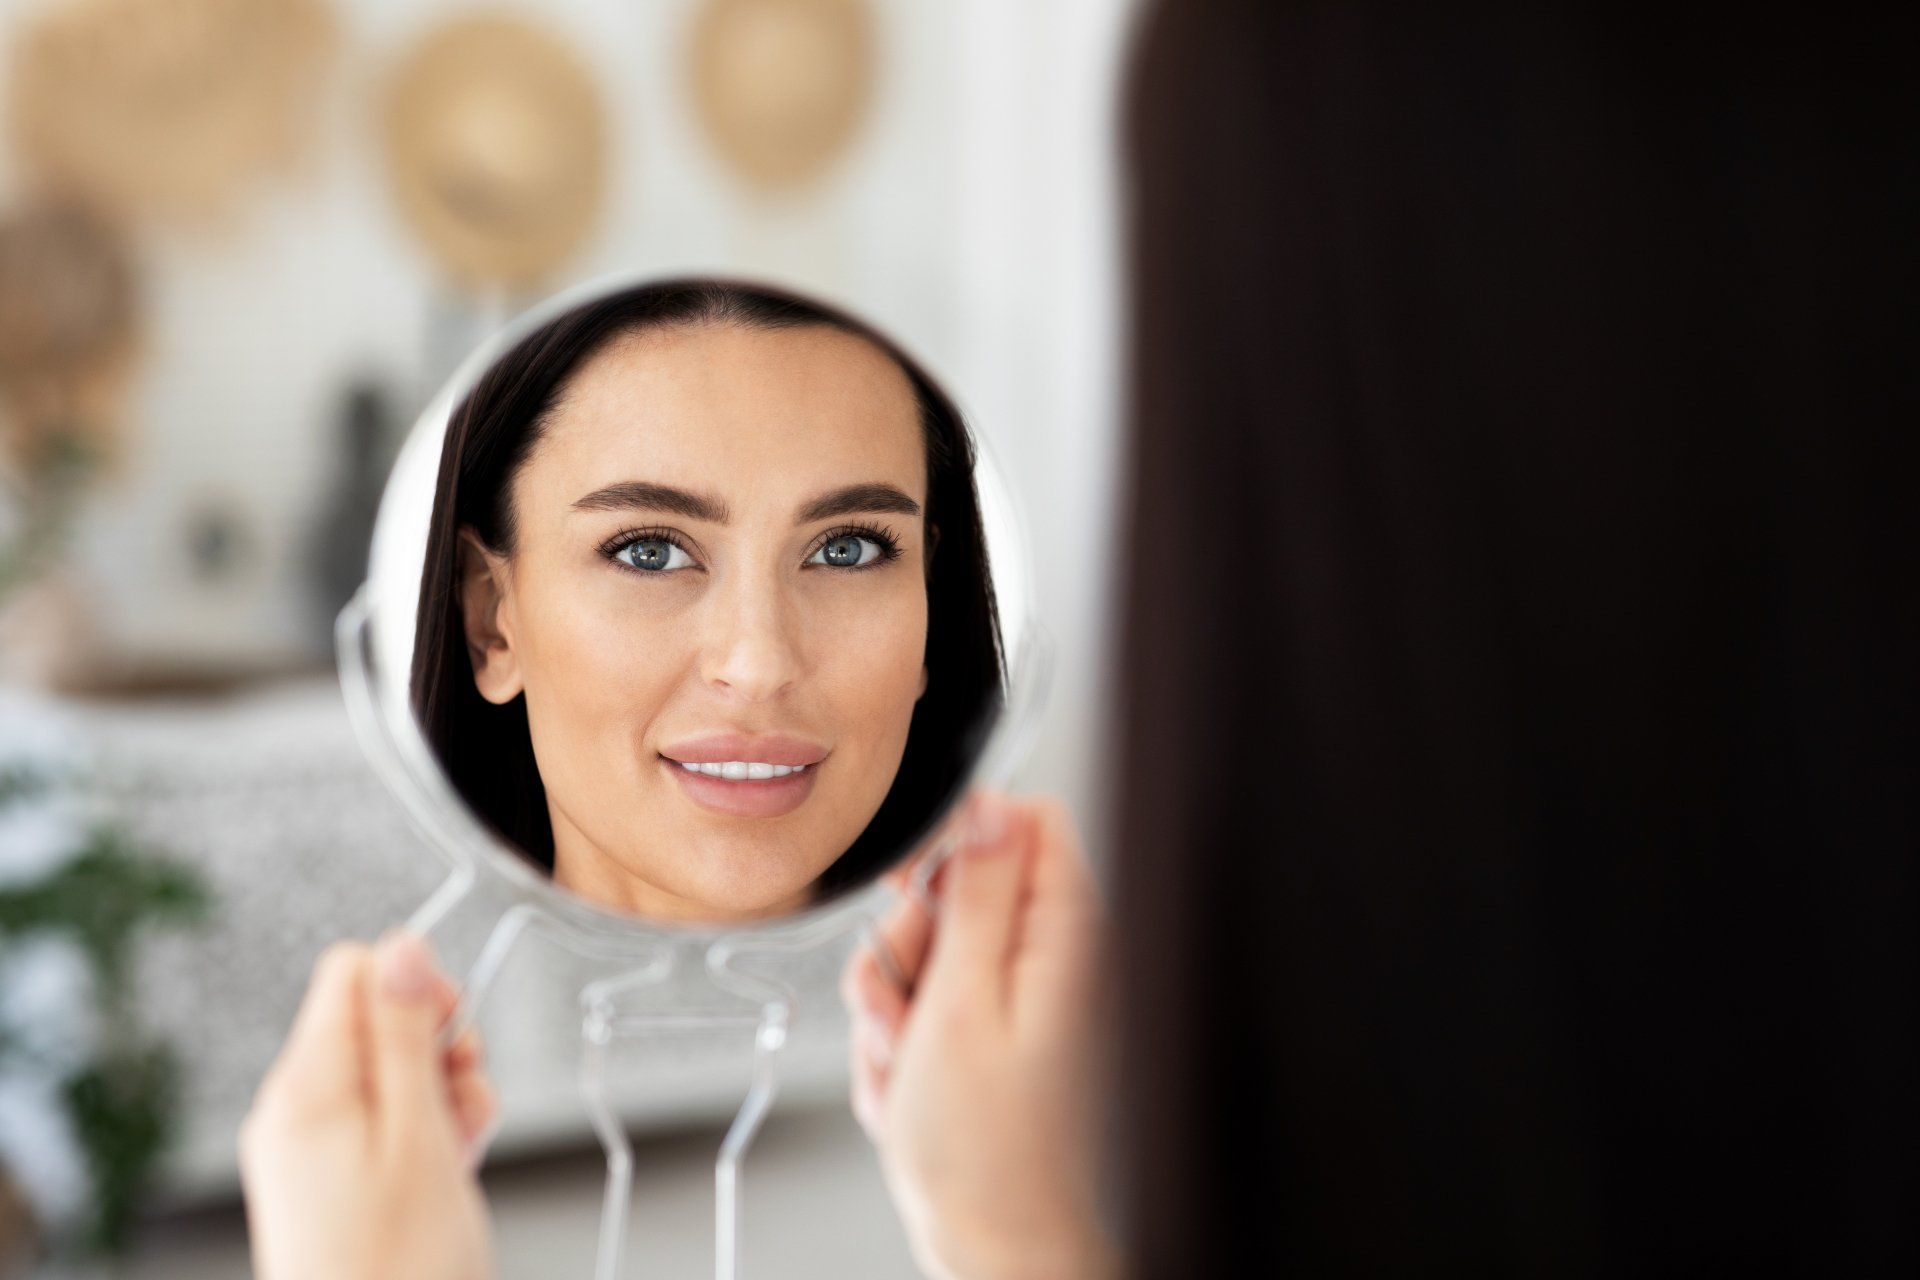 brunette woman looking at her reflection in a hand held mirror